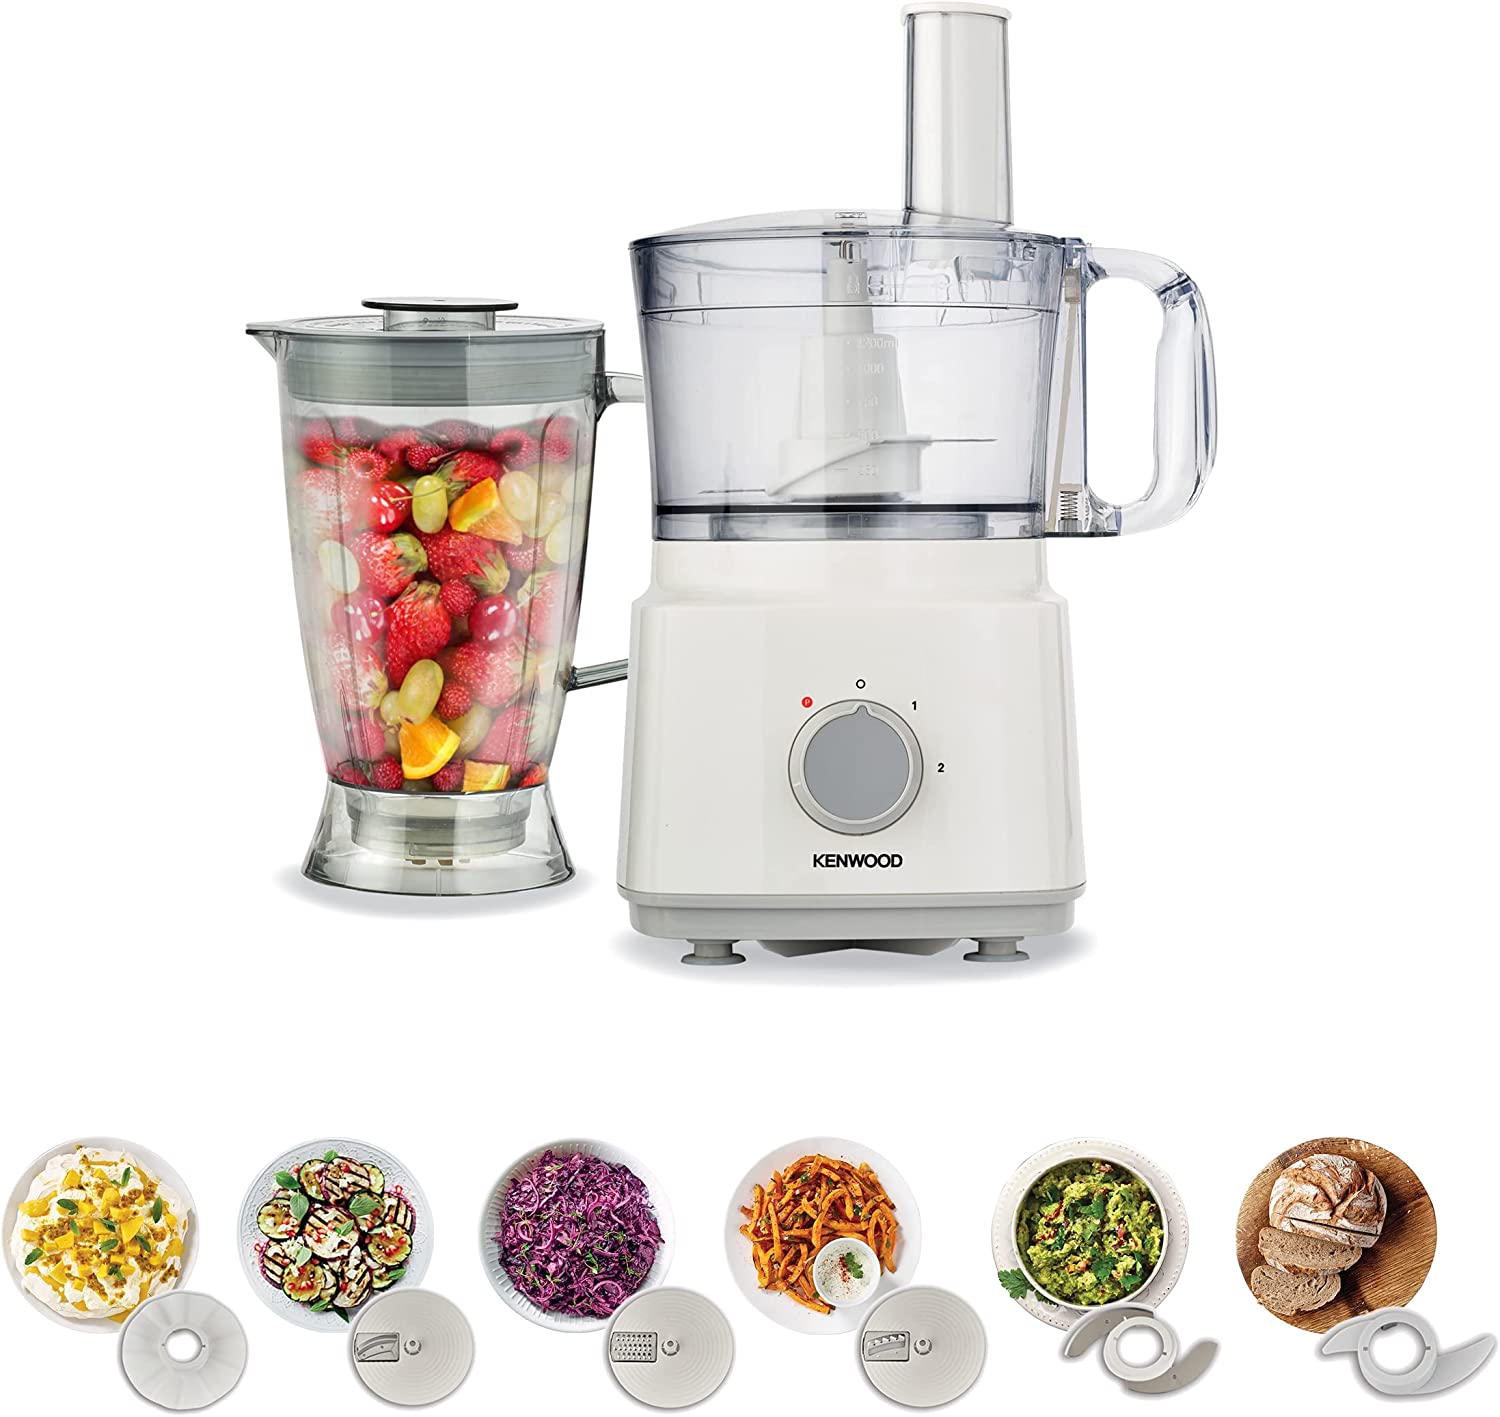 Kenwood Food Processor 750W Multi Functional With 3 Interchangeable Disks Blender Whisk Dough Maker Fdp03 White